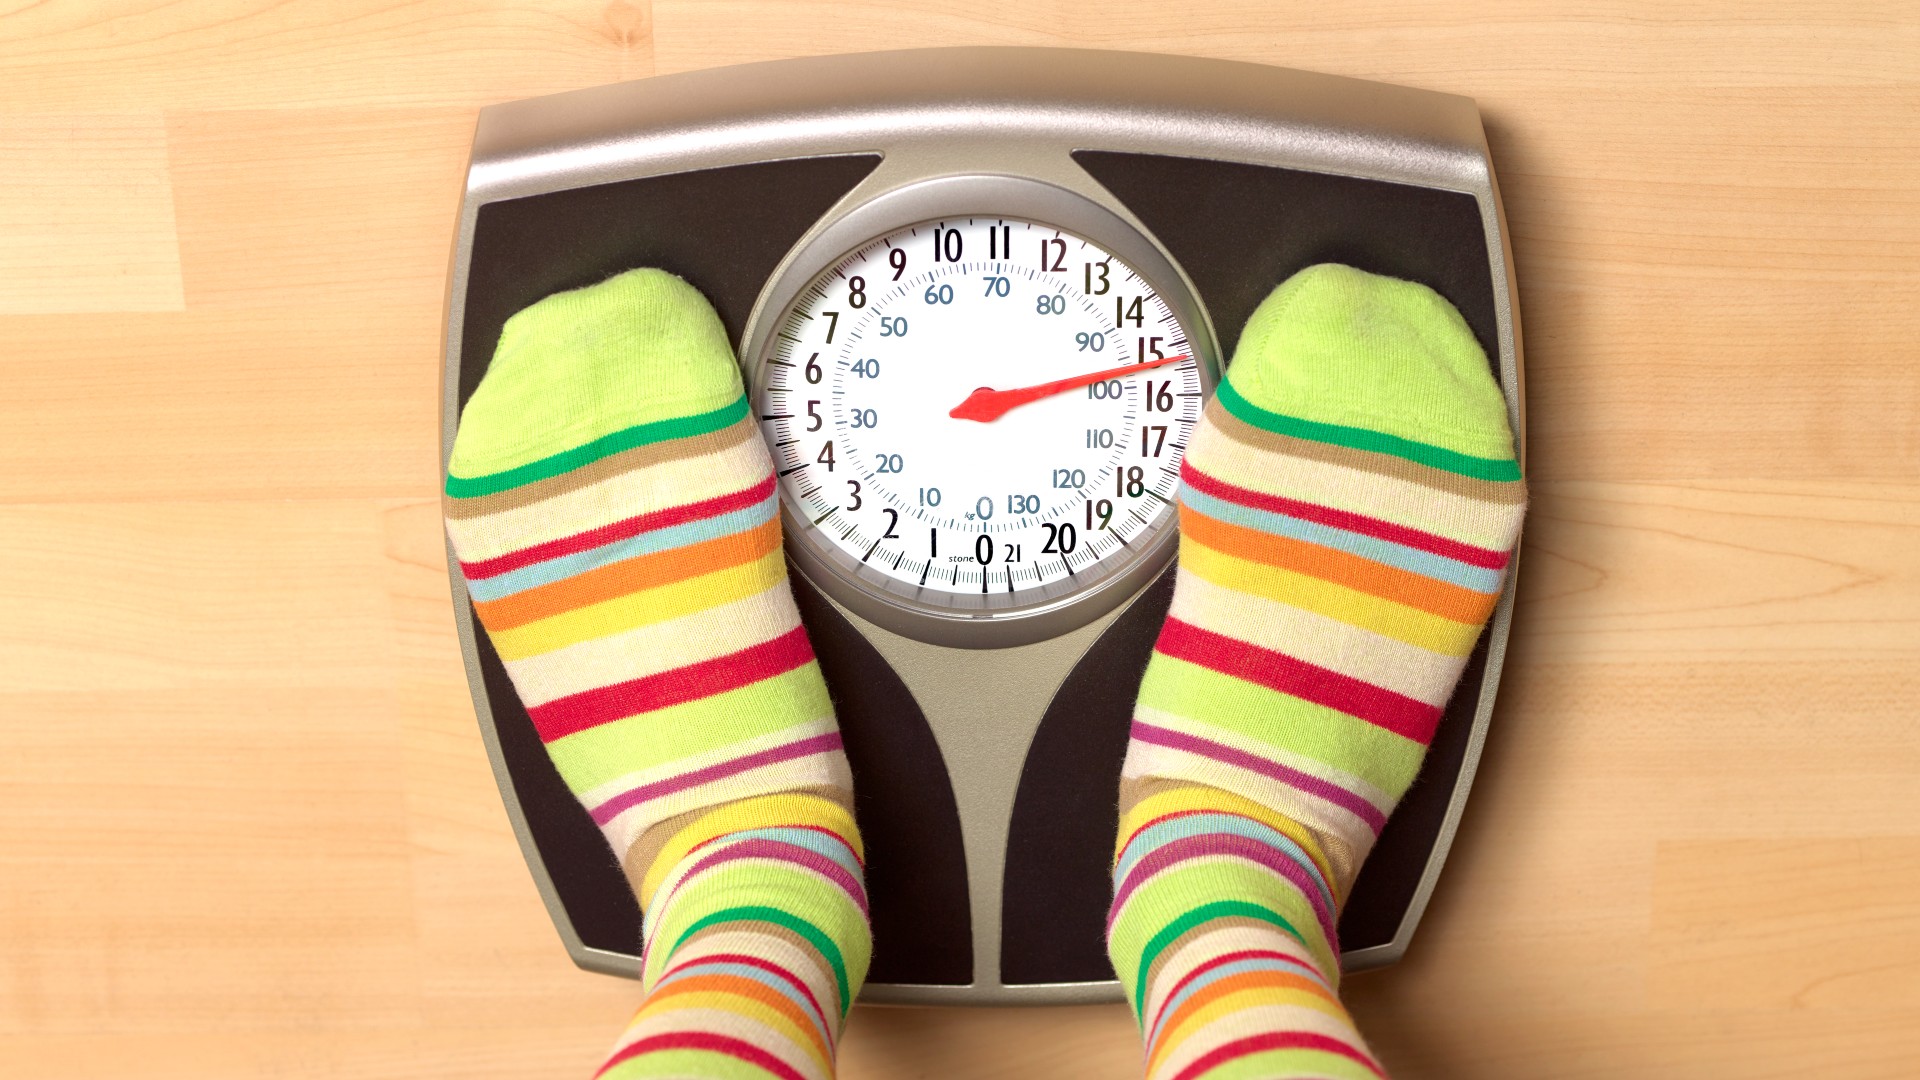 Watch as we dive into the fascinating world of BMI (Body Mass